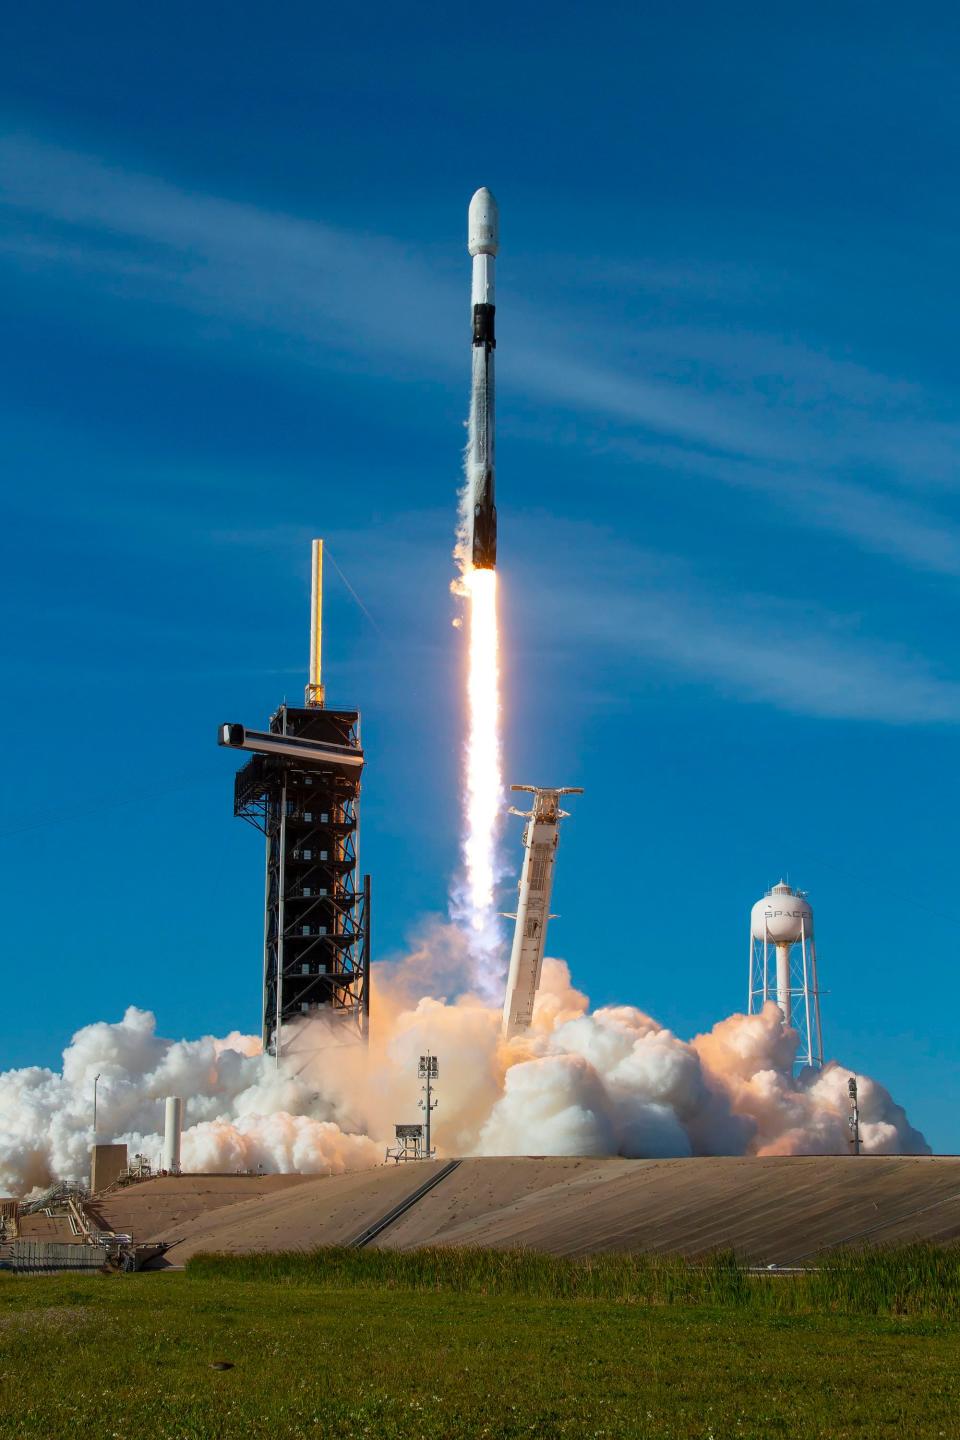 This Falcon 9 rocket blasted off from the Kennedy Space Center.